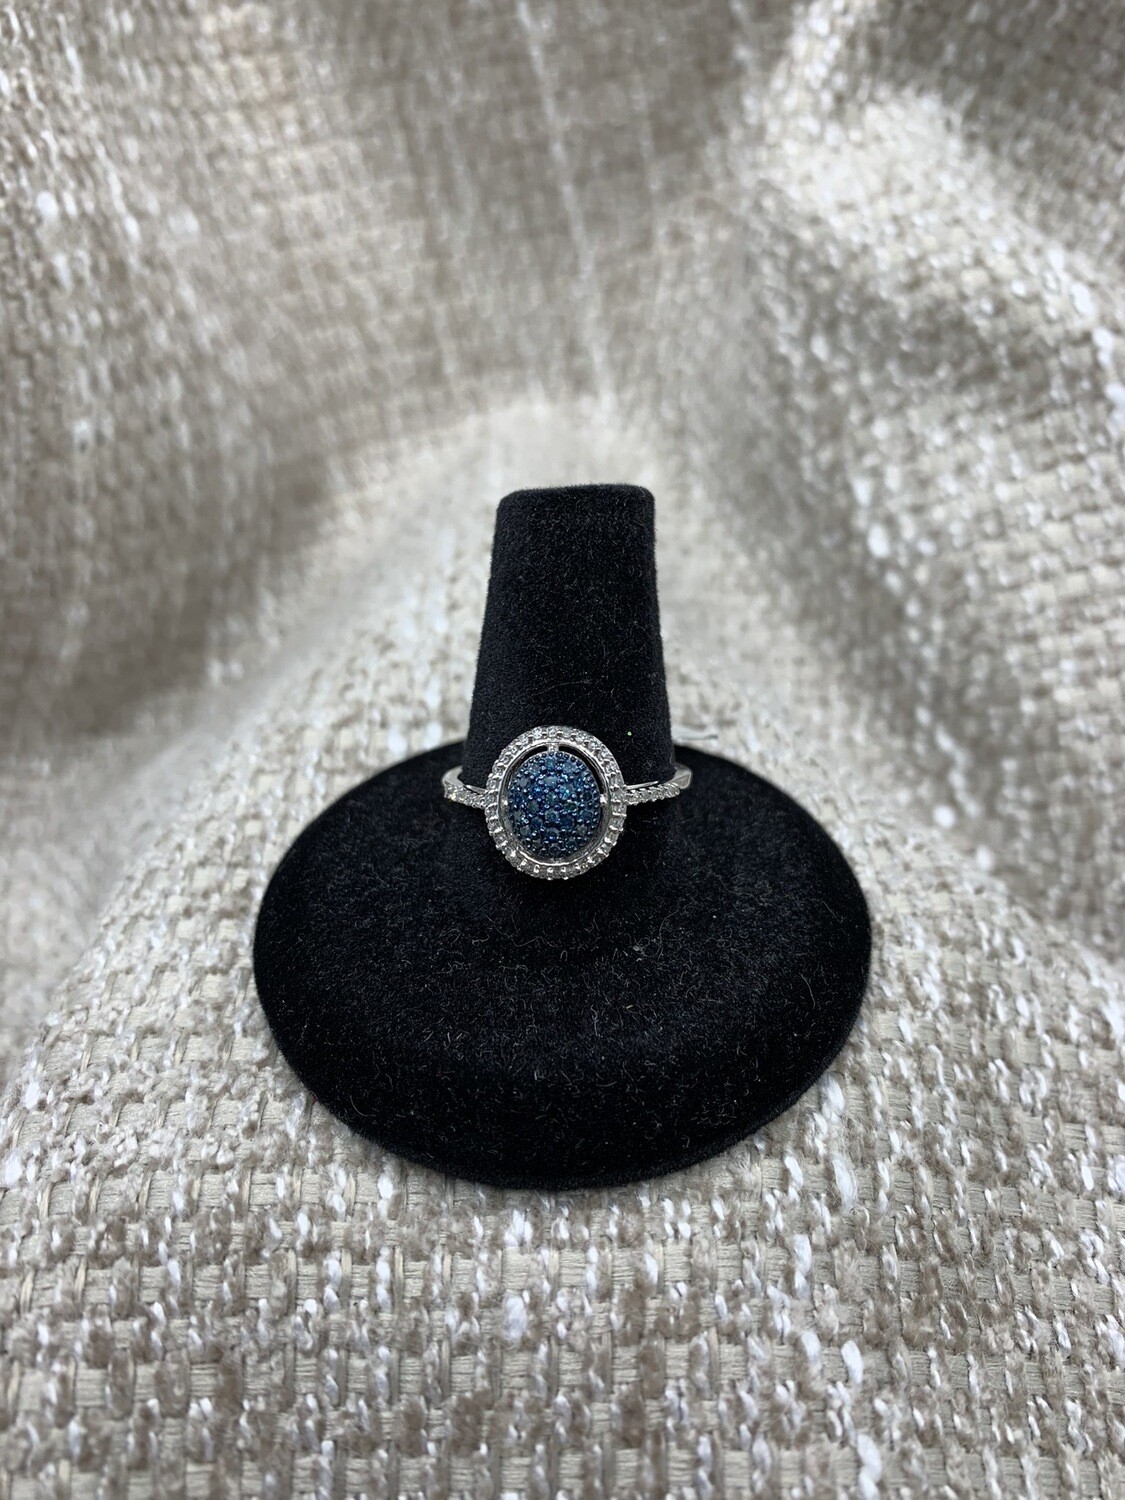 Blue Diamond 1/4 ct Total Weight Ring set in White Gold